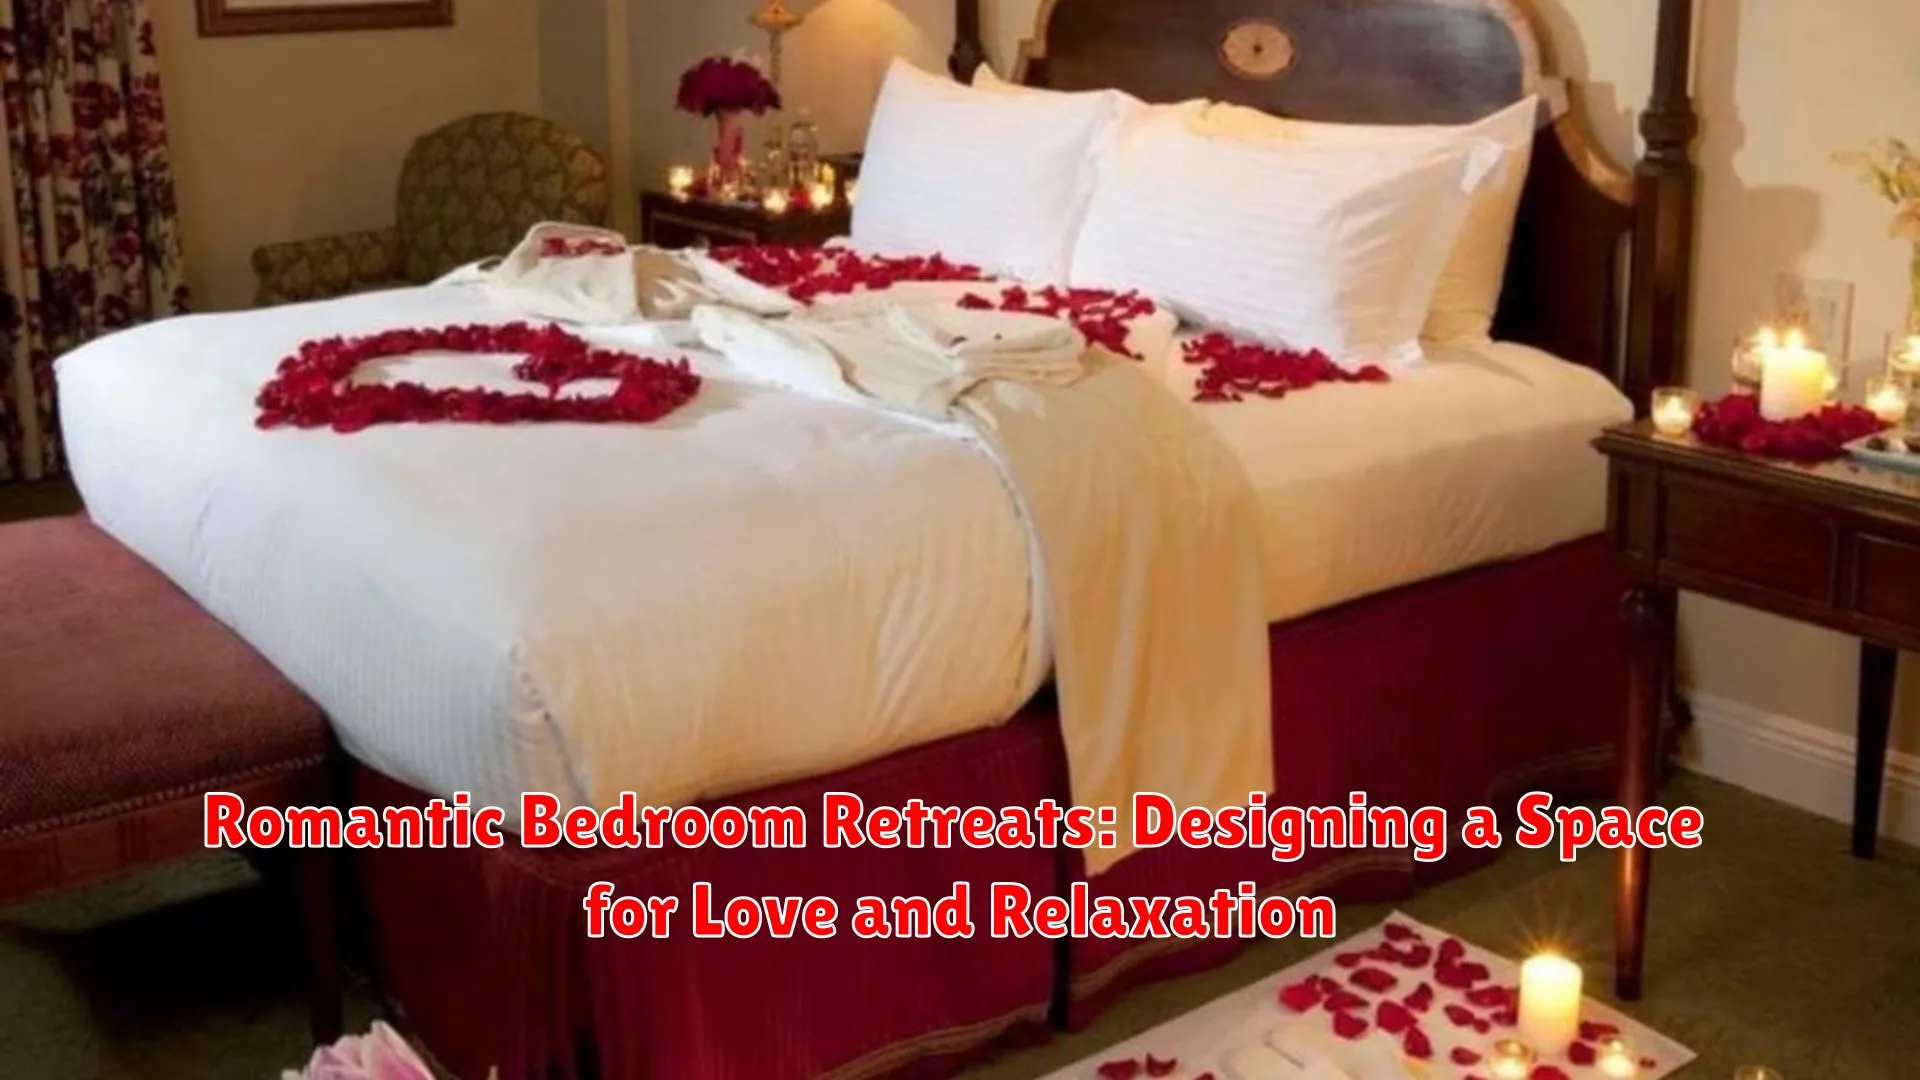 Romantic Bedroom Retreats: Designing a Space for Love and Relaxation